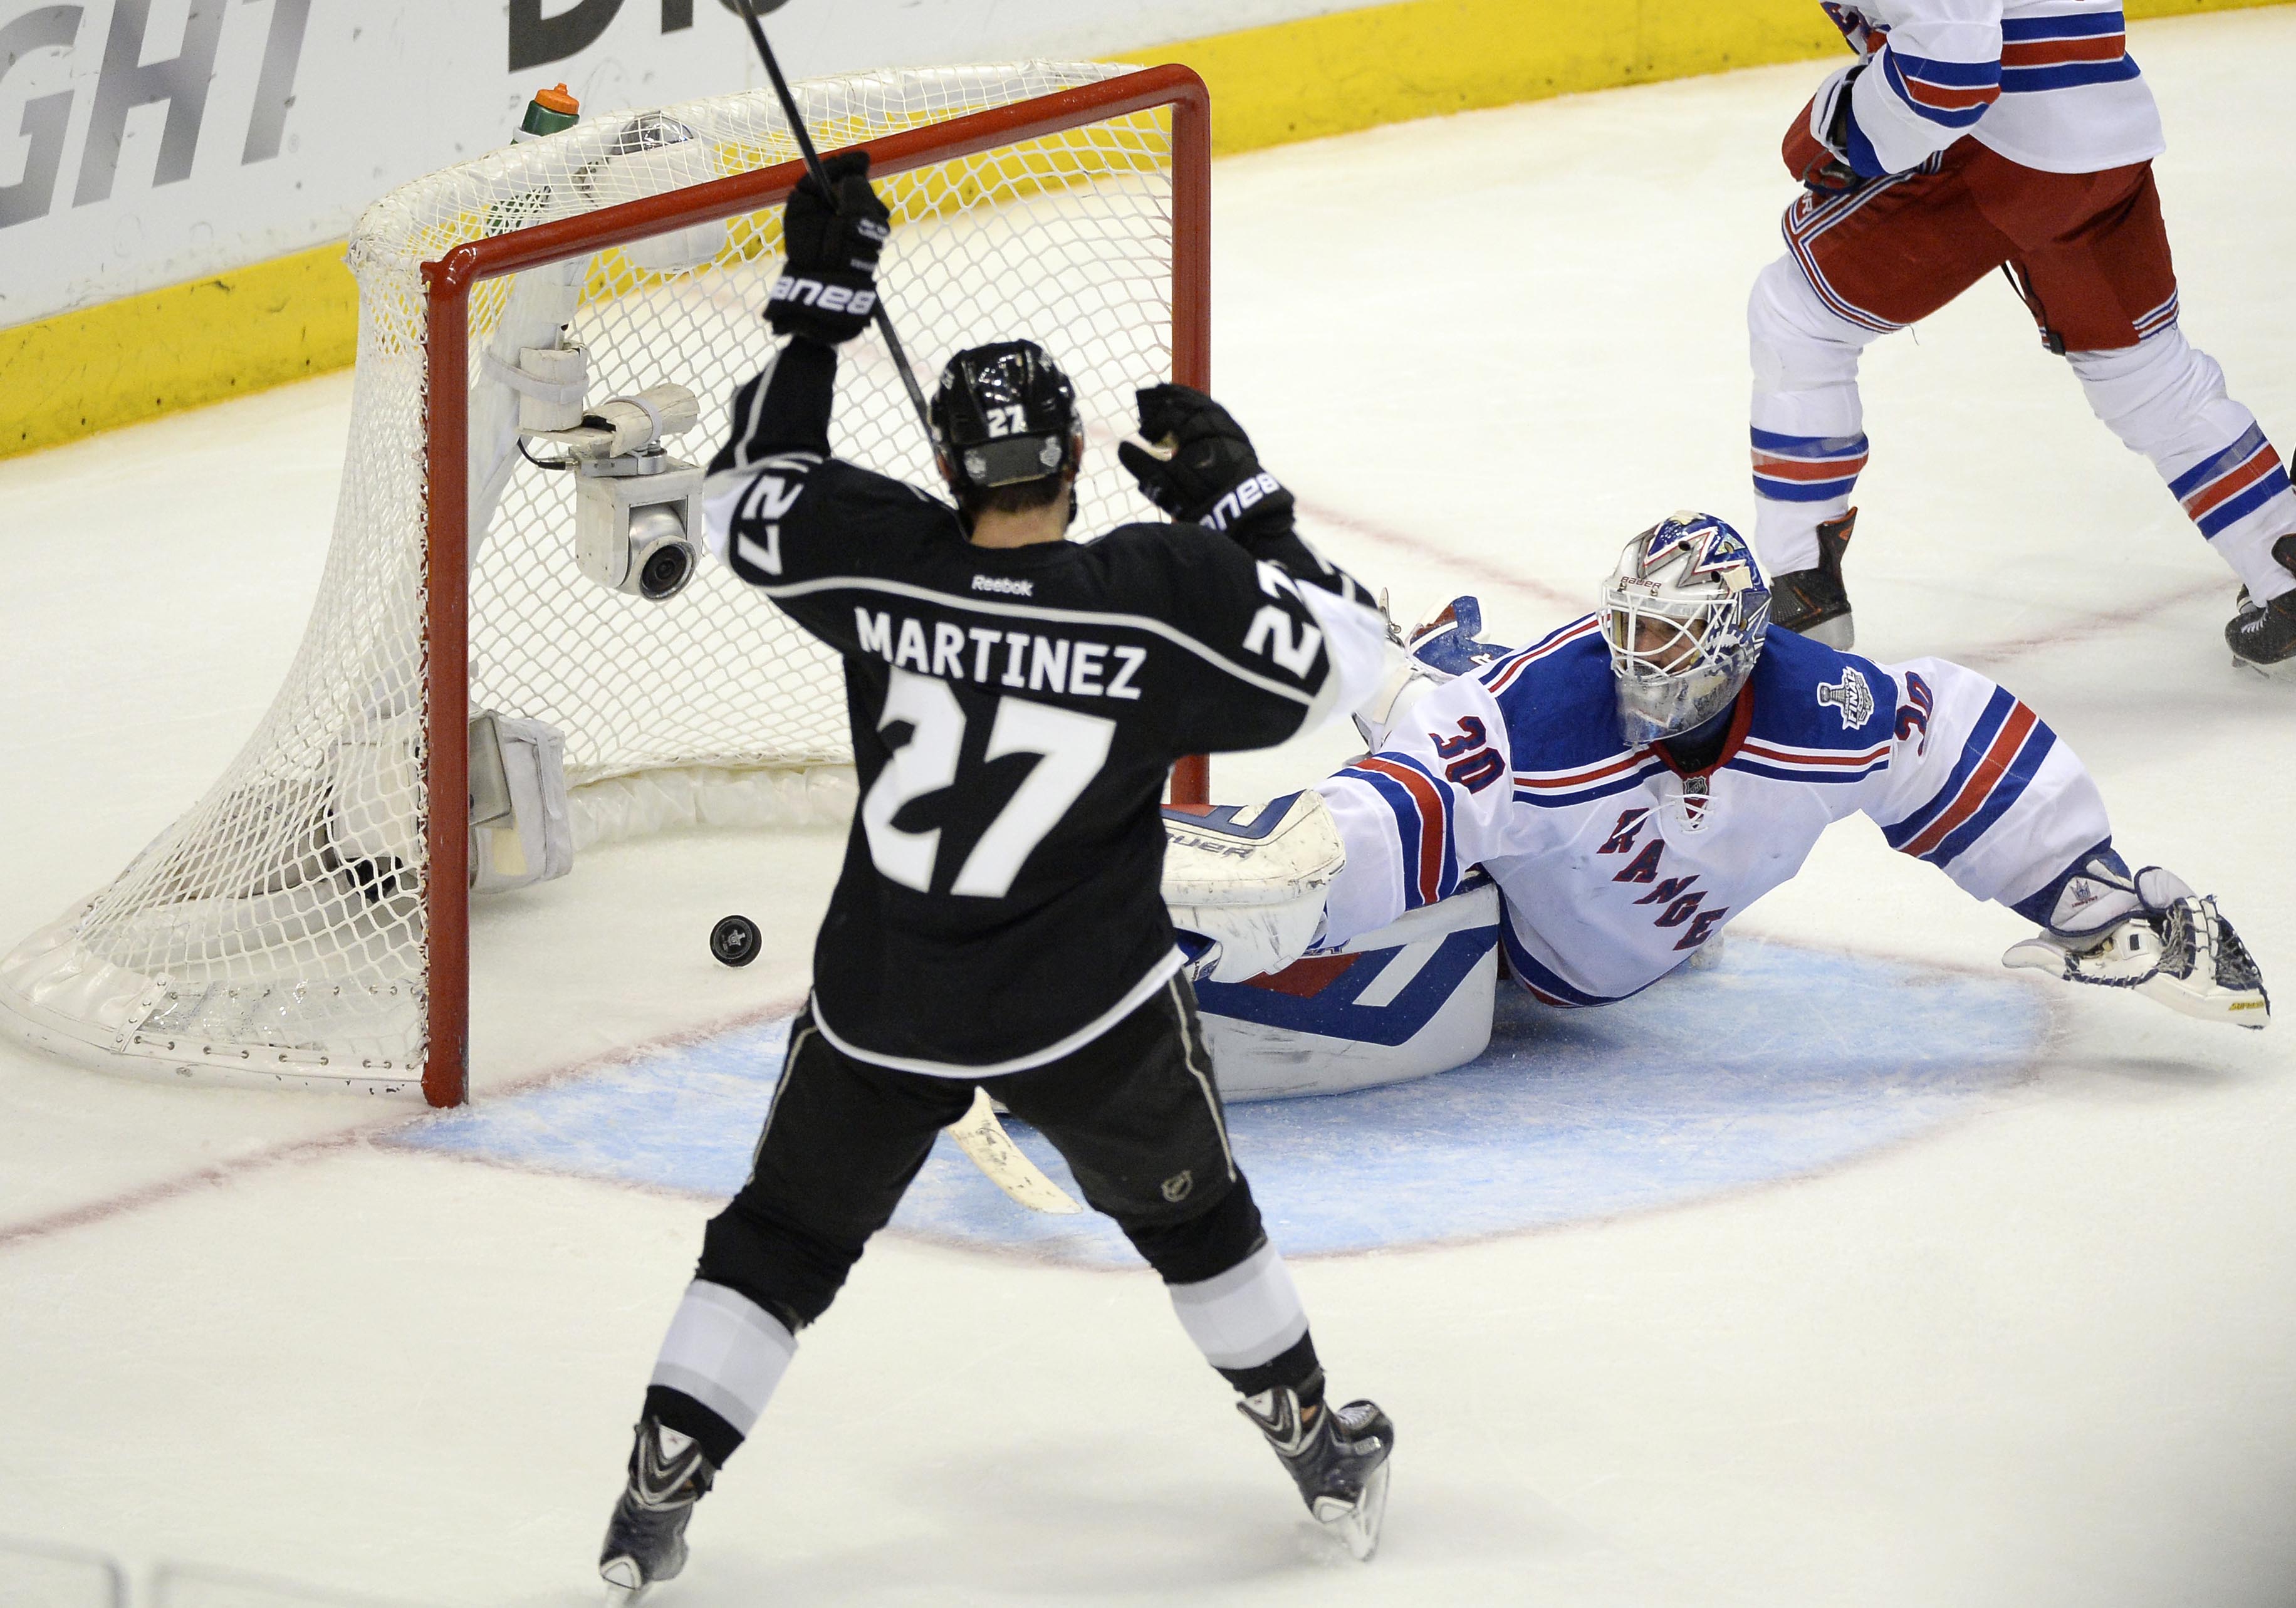 The Year in Review 2012: Kings win Stanley Cup, lockout delays NHL 